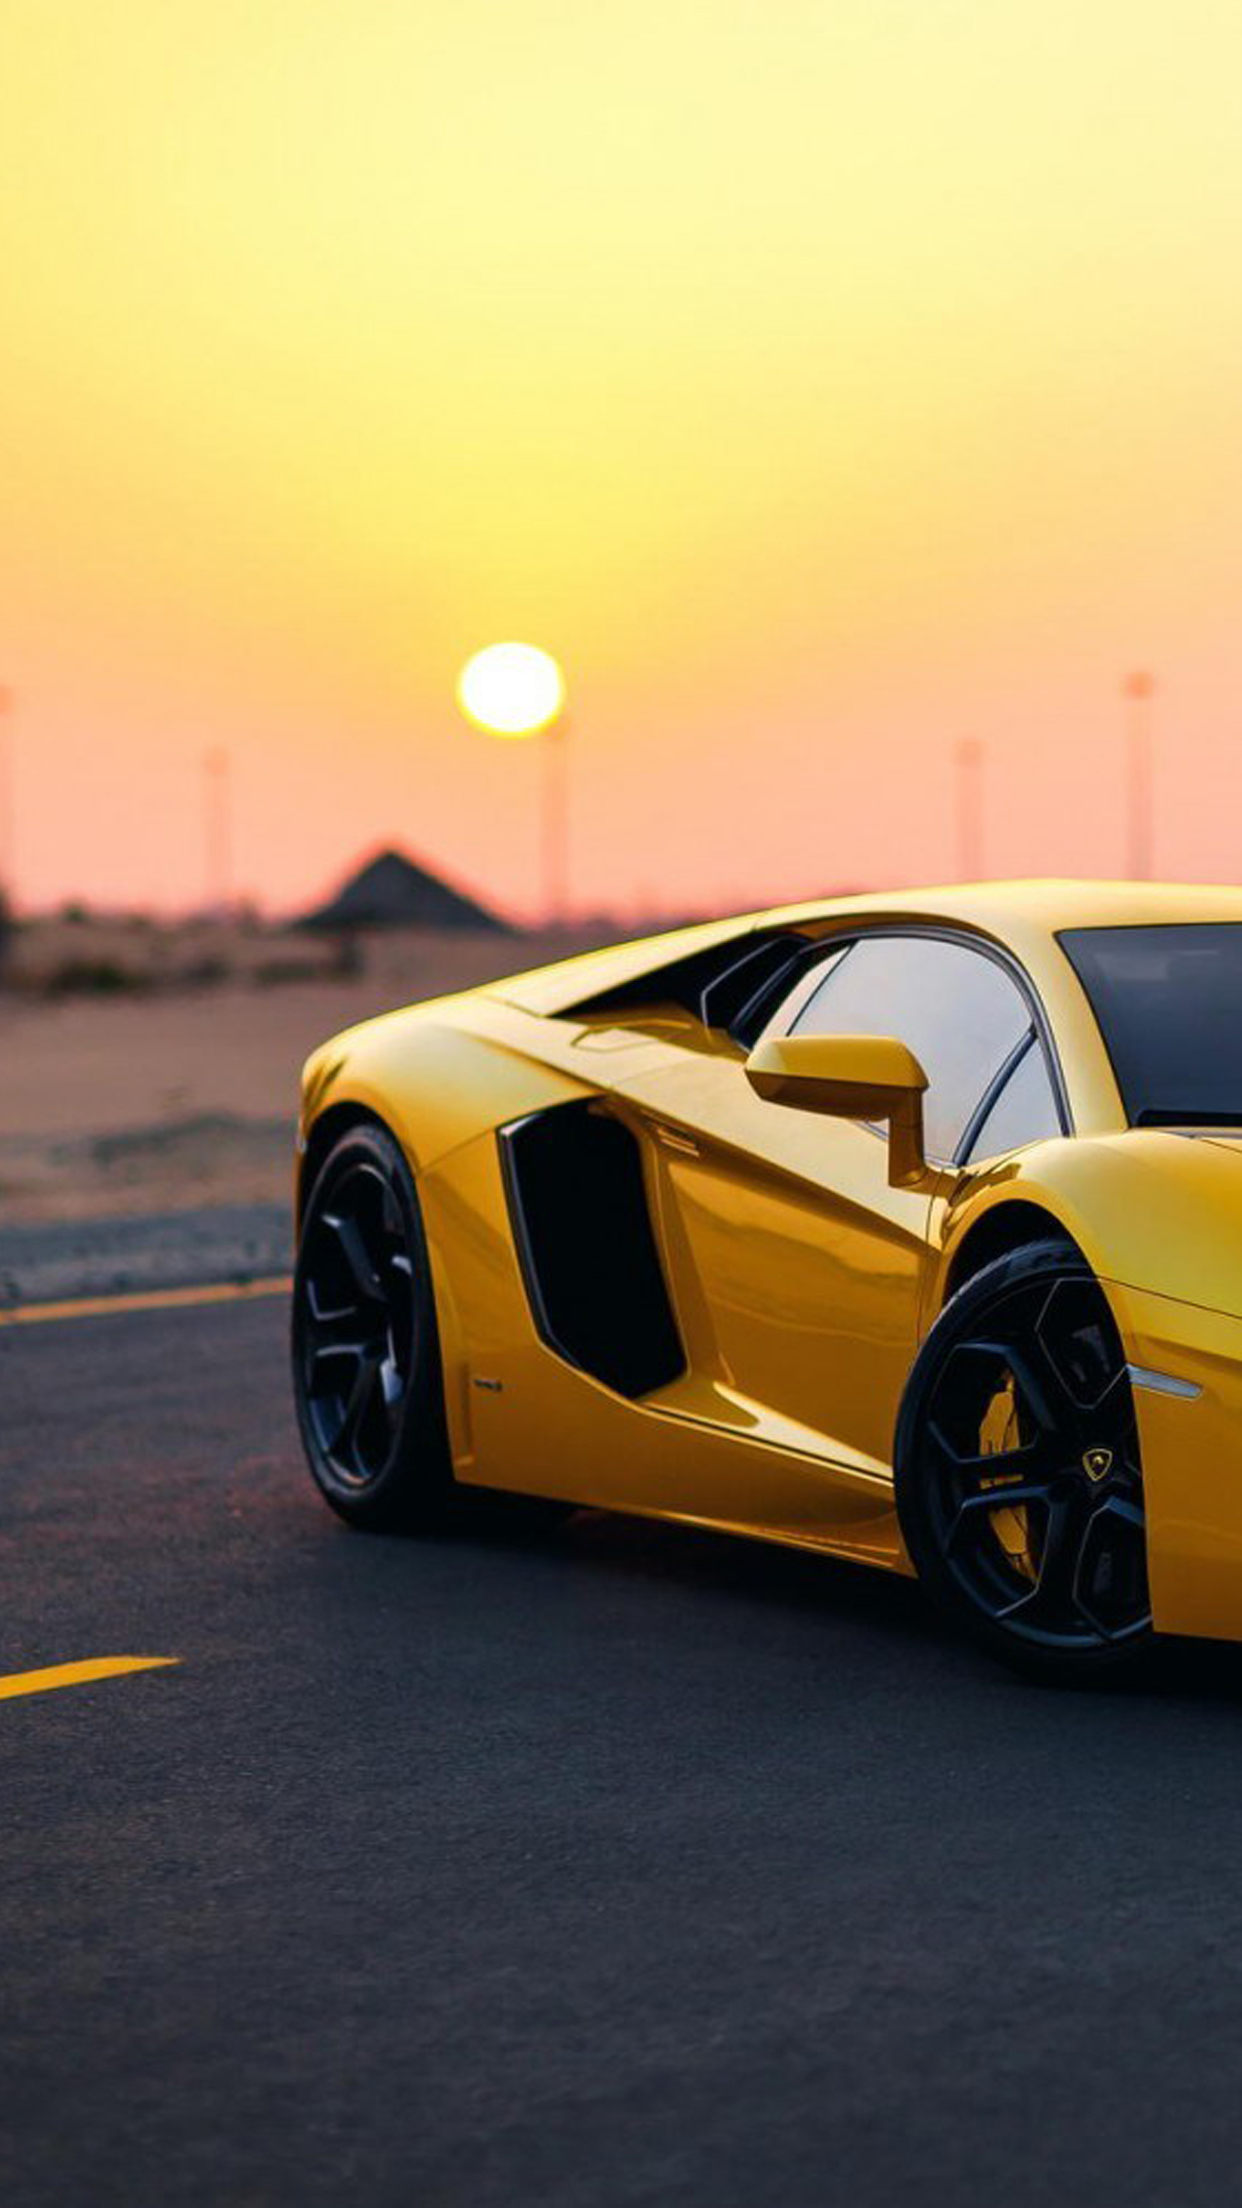 Supercar Wallpaper For iPhone